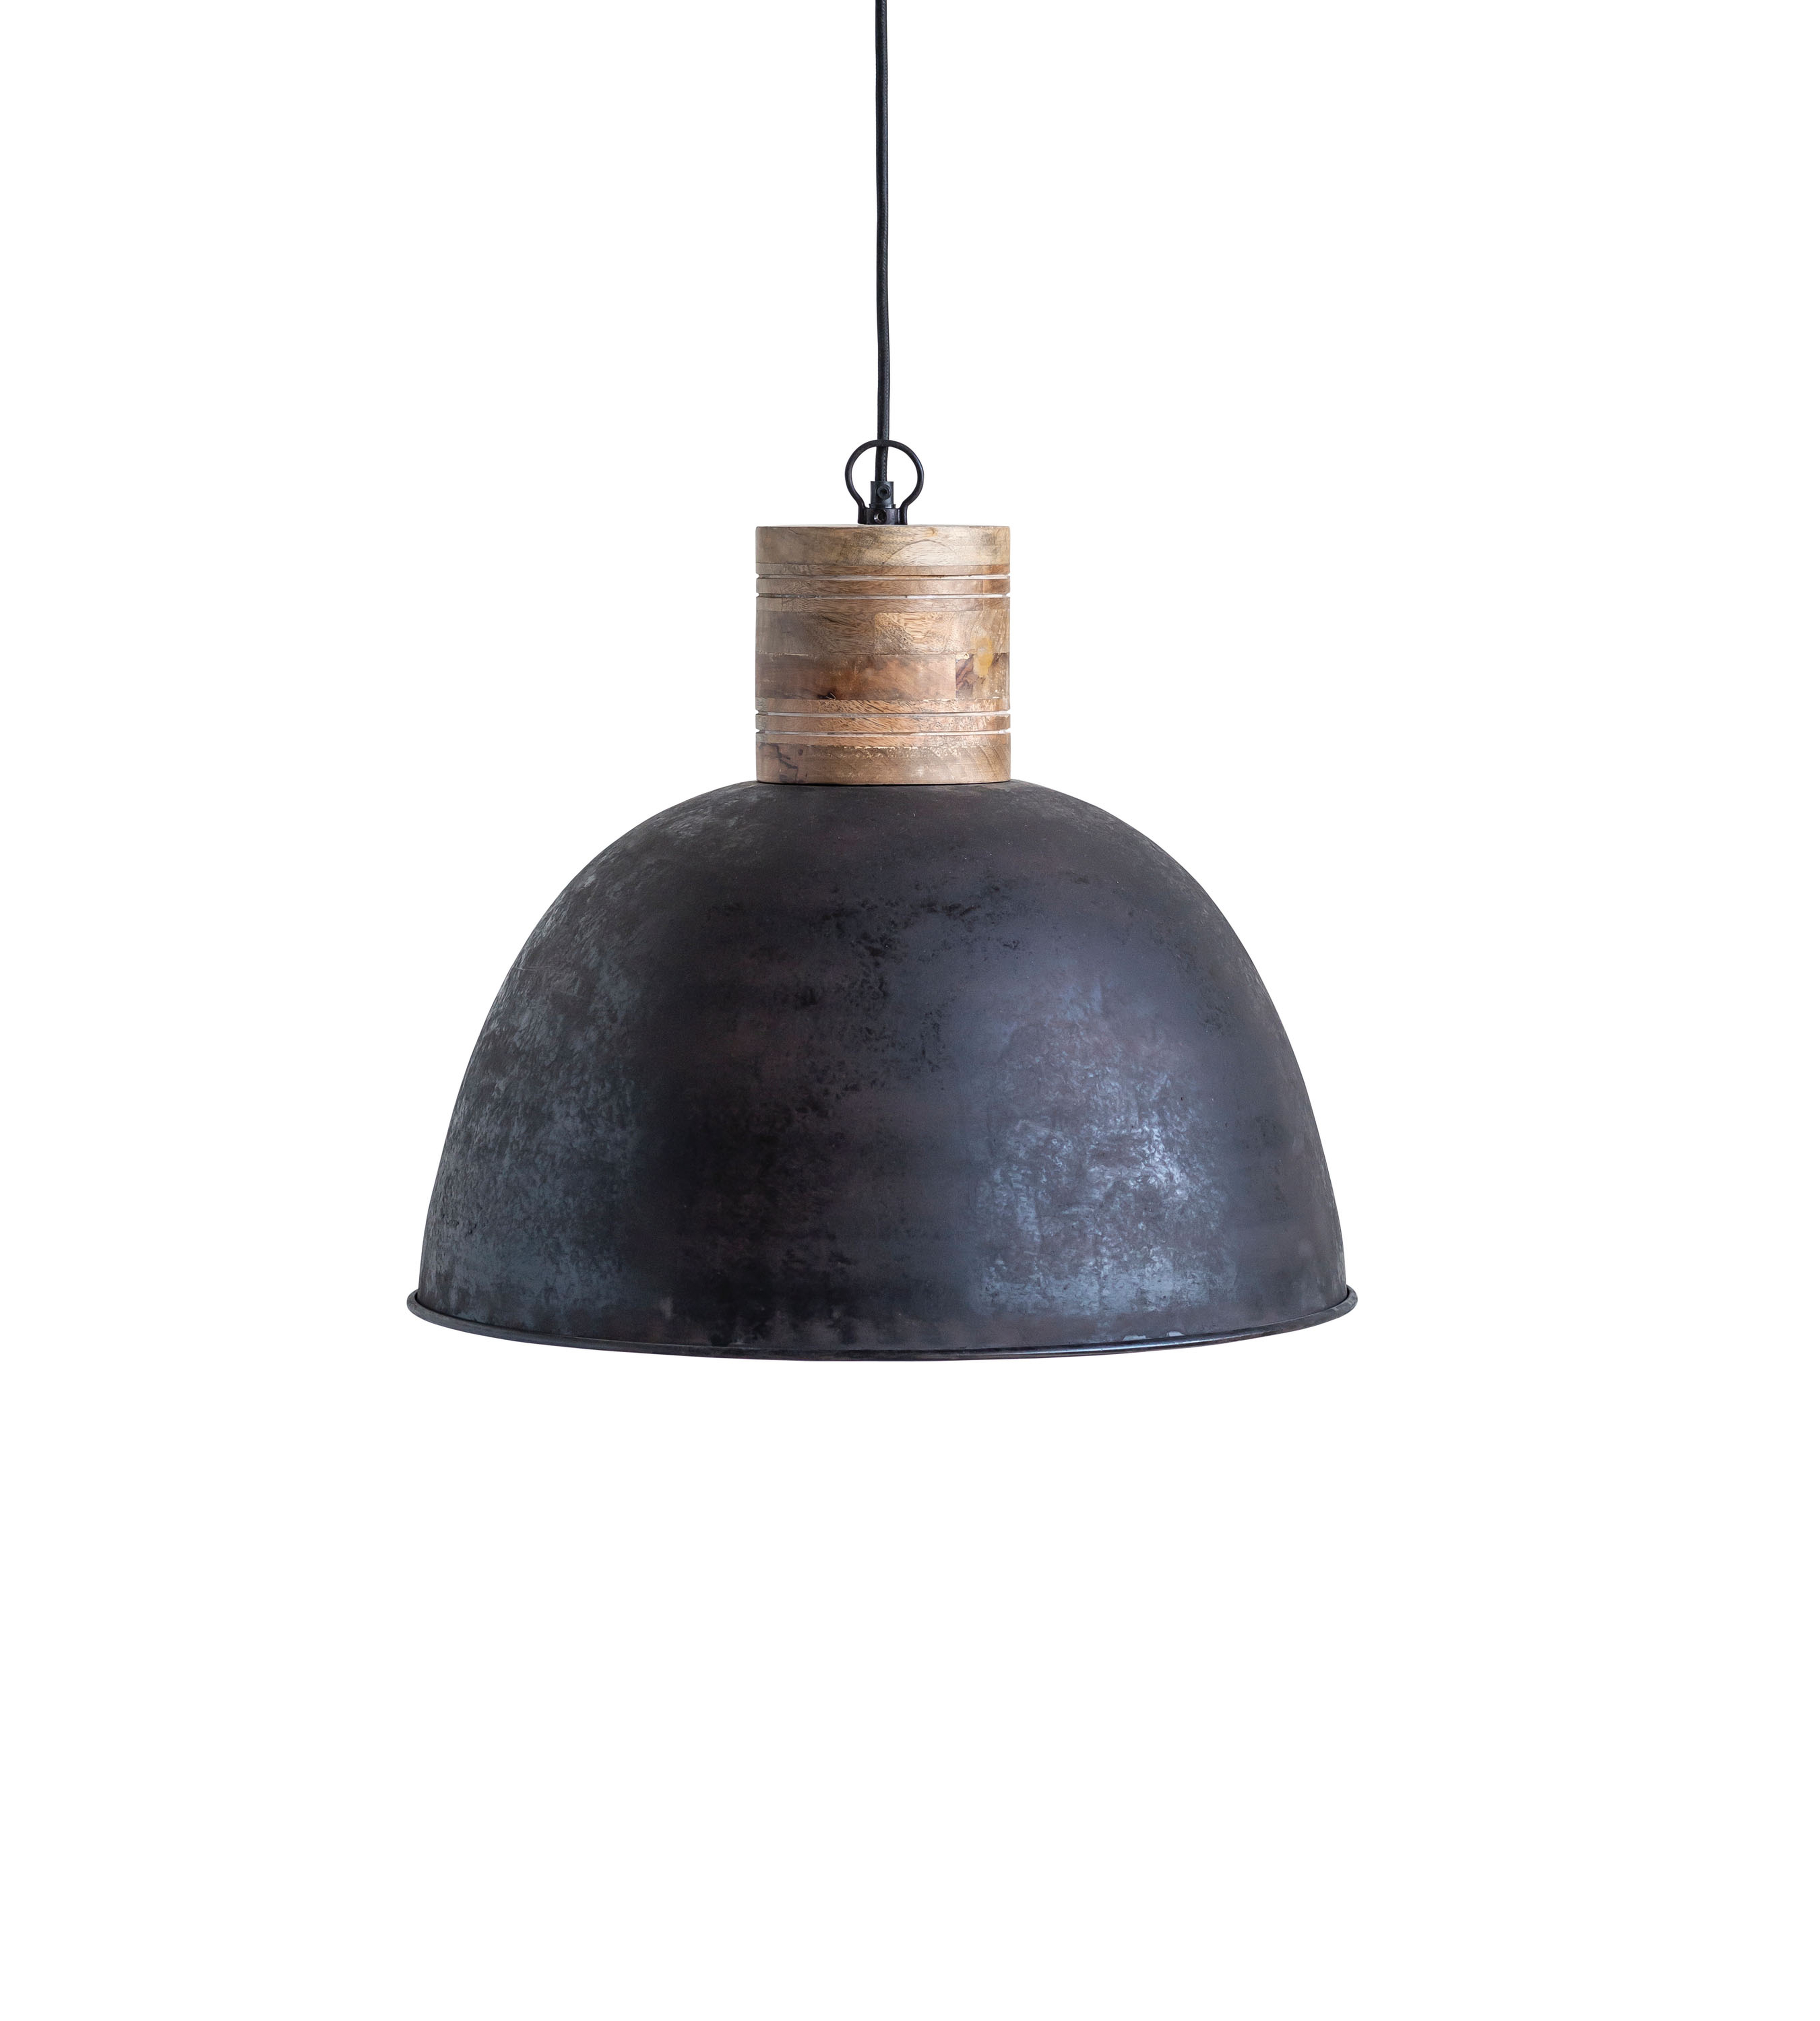 Black Metal Pendant Light with Wood Neck - Nomad Home